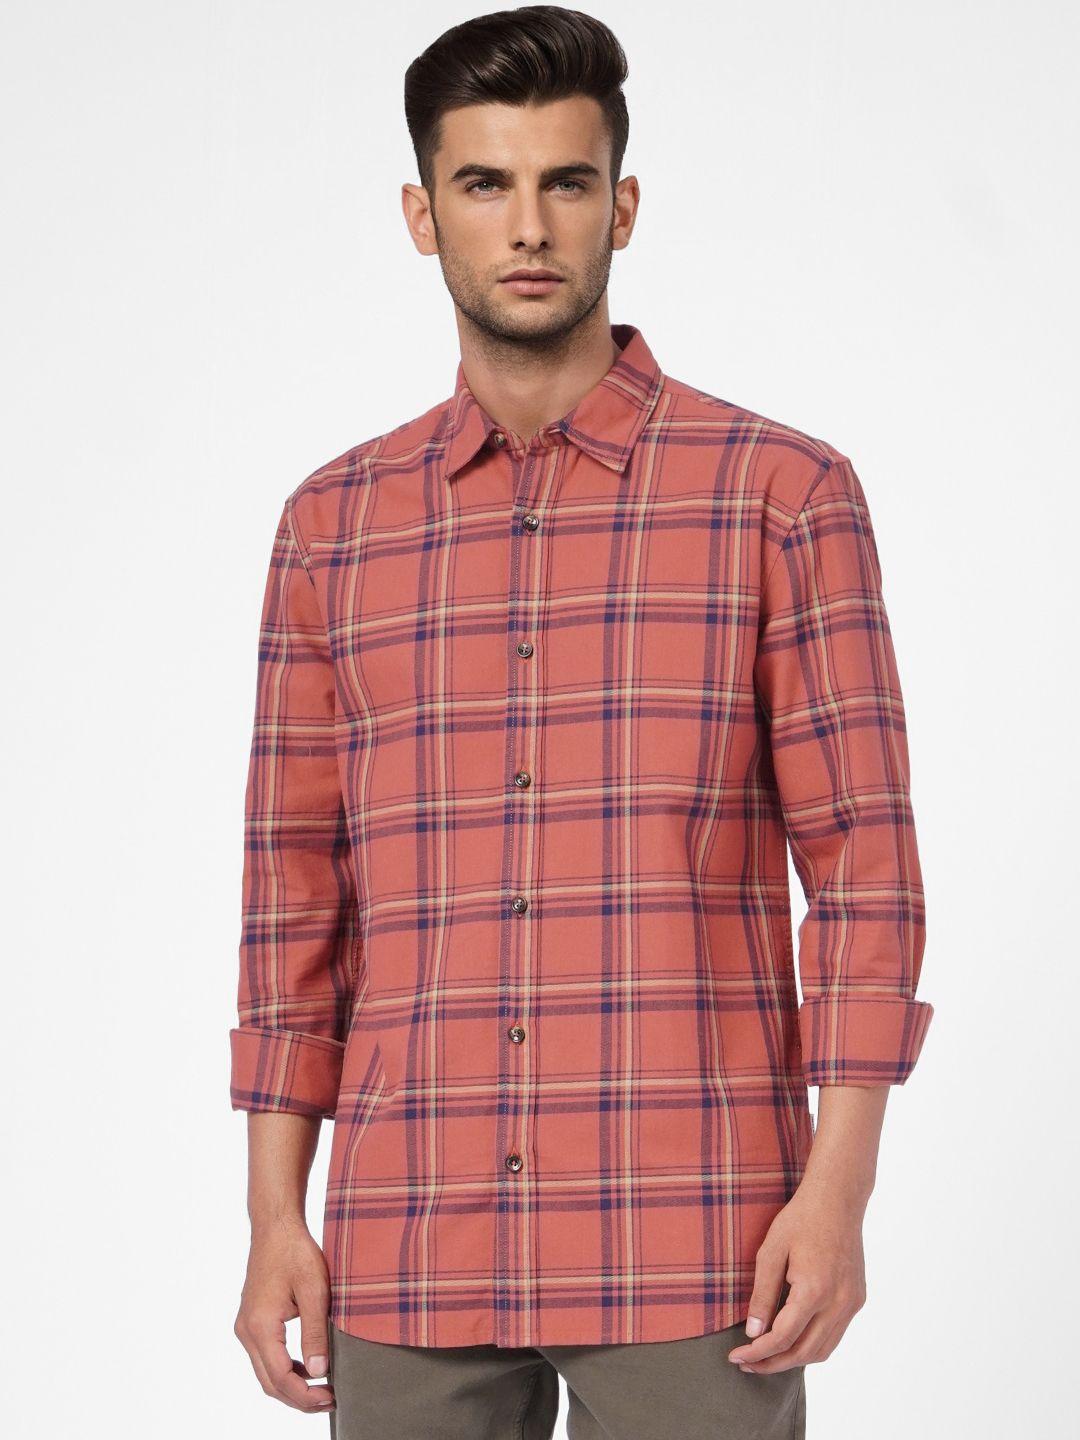 jack-&-jones-men-red-&-navy-blue-checked-pure-cotton-casual-shirt